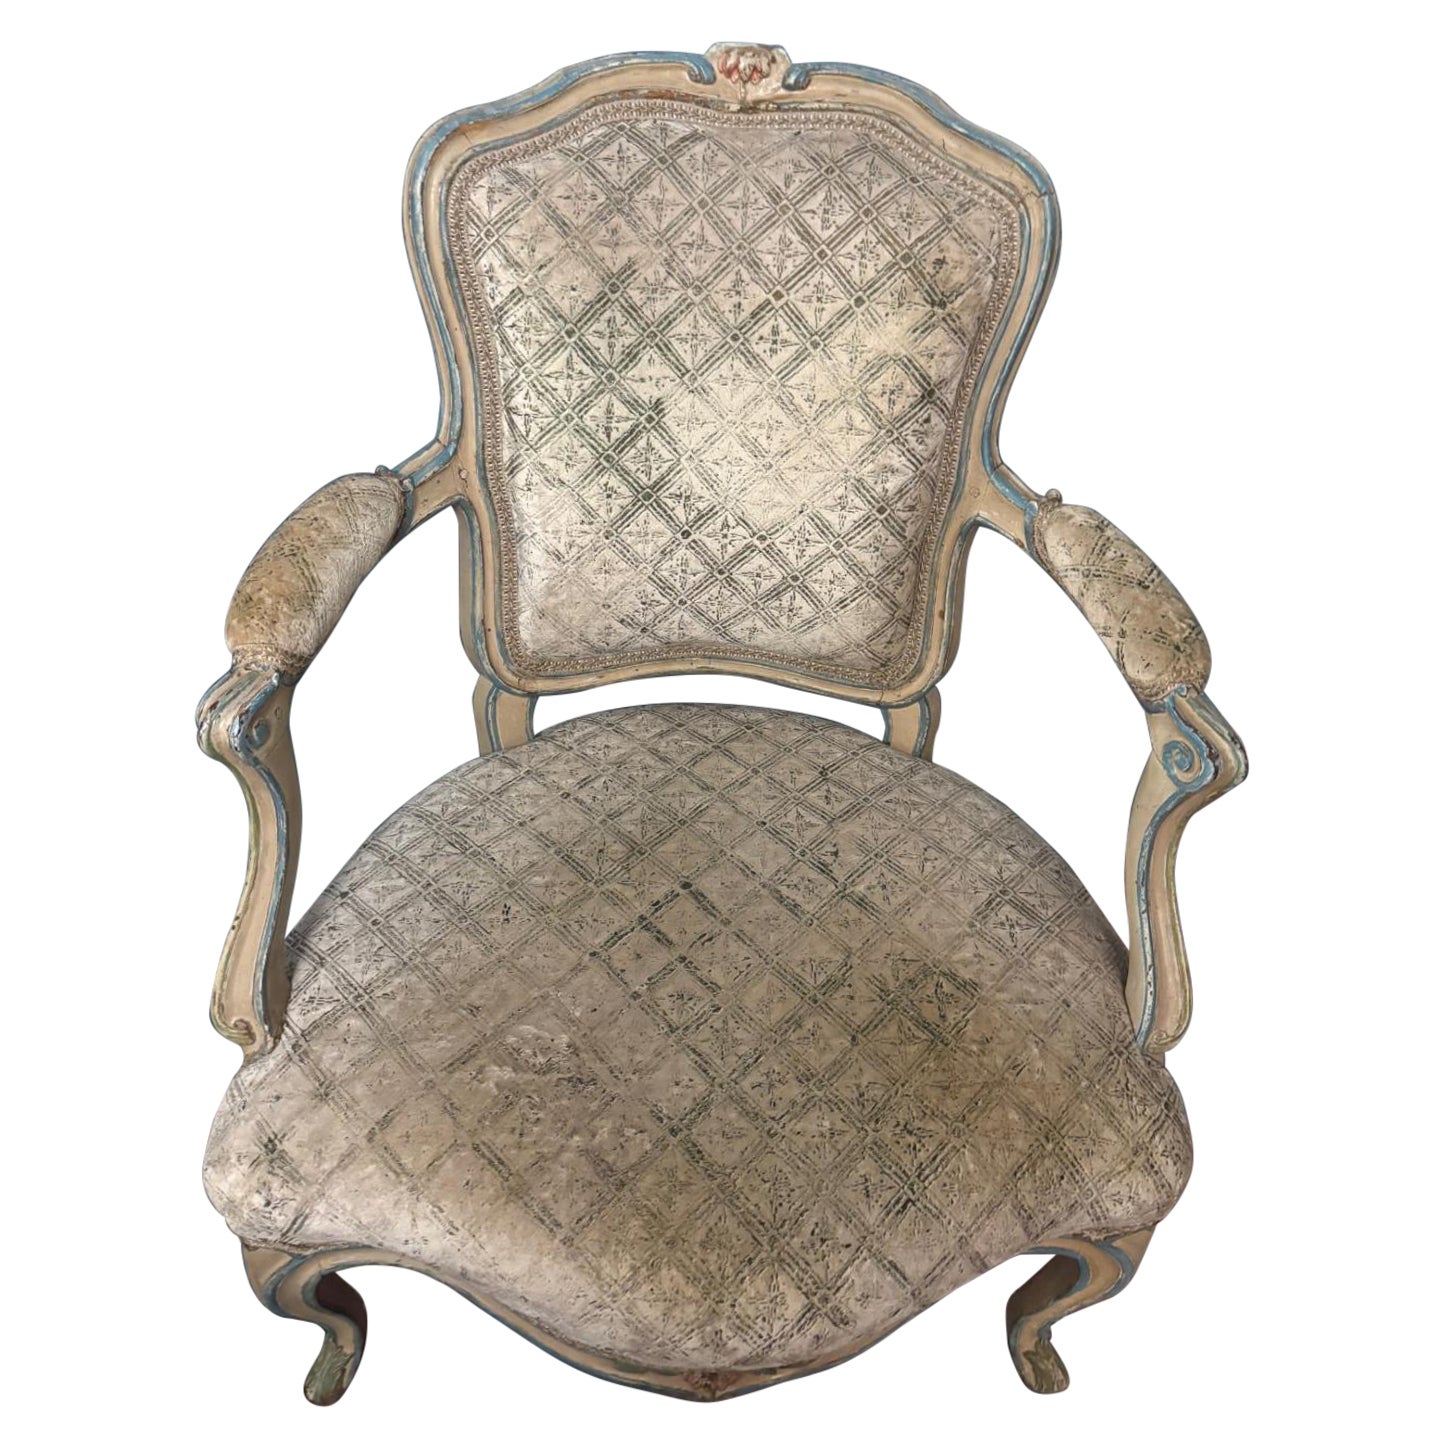 Sabrina Braxton Velvet Beige and Gold Fabric French Armchair